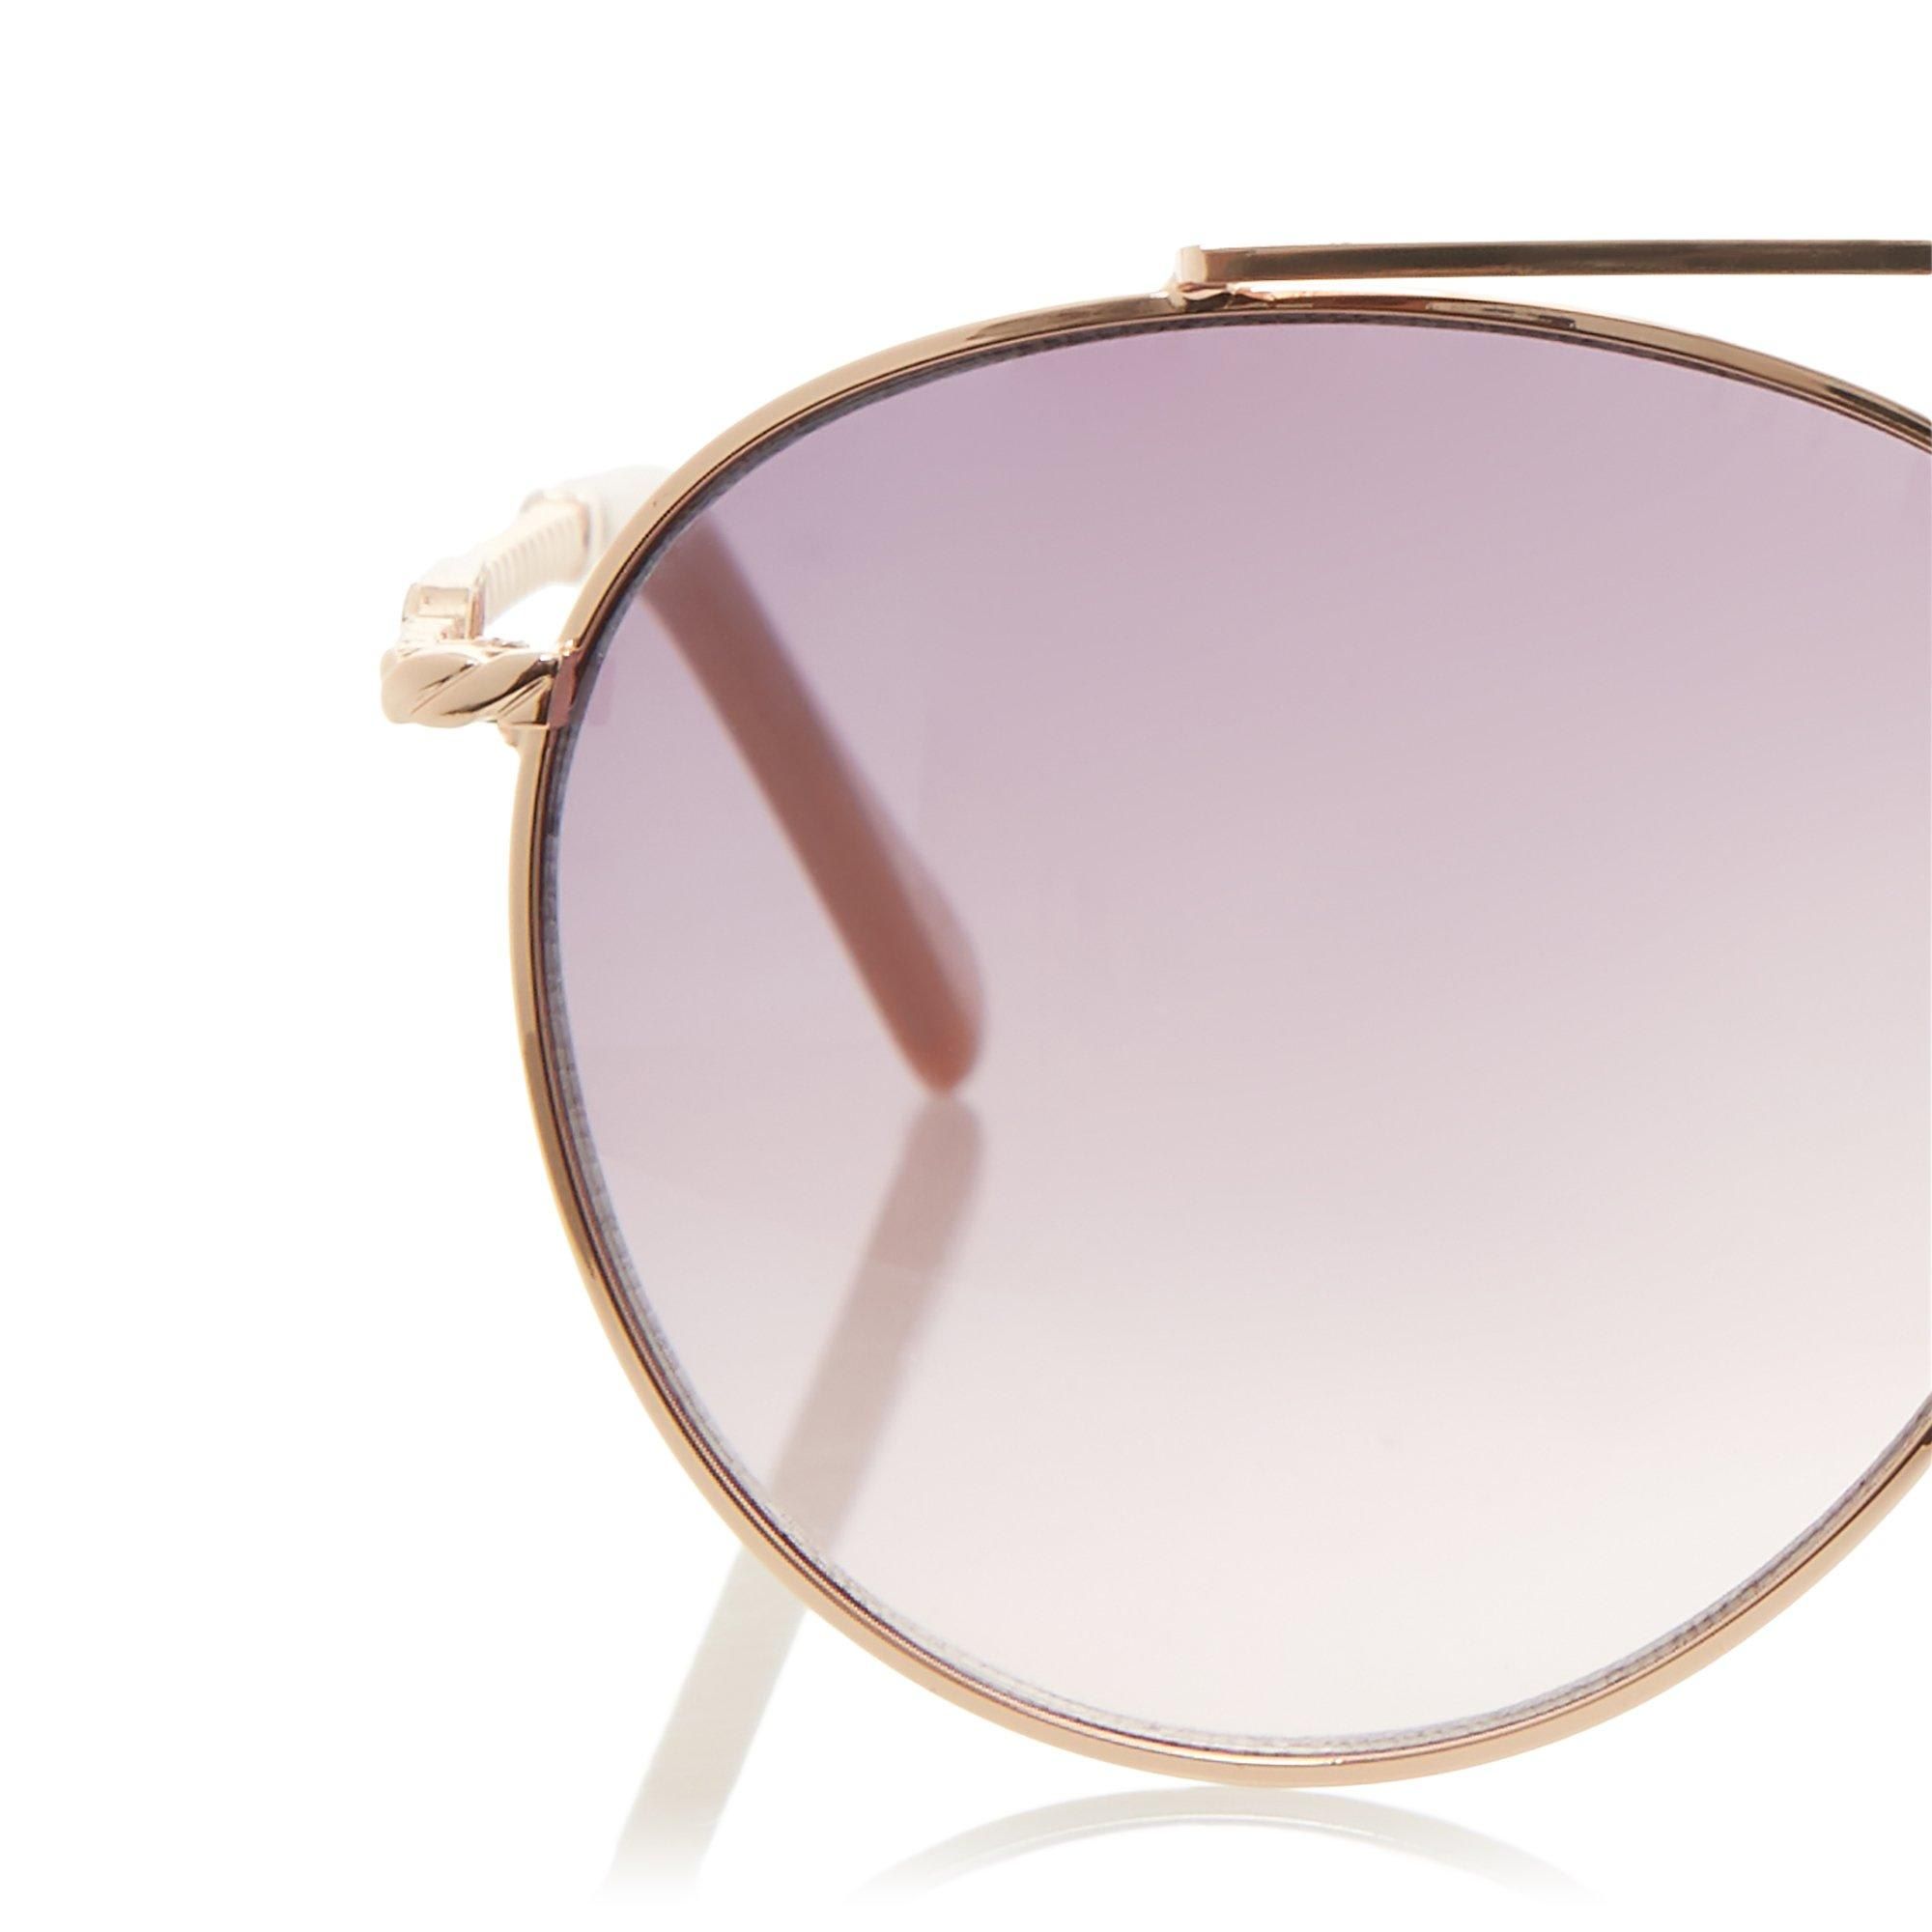 Complete your summer edits with these aviator sunglasses. With chic twisted metal arms that feature a signature brand detail. The lenses display a light smoke finish.